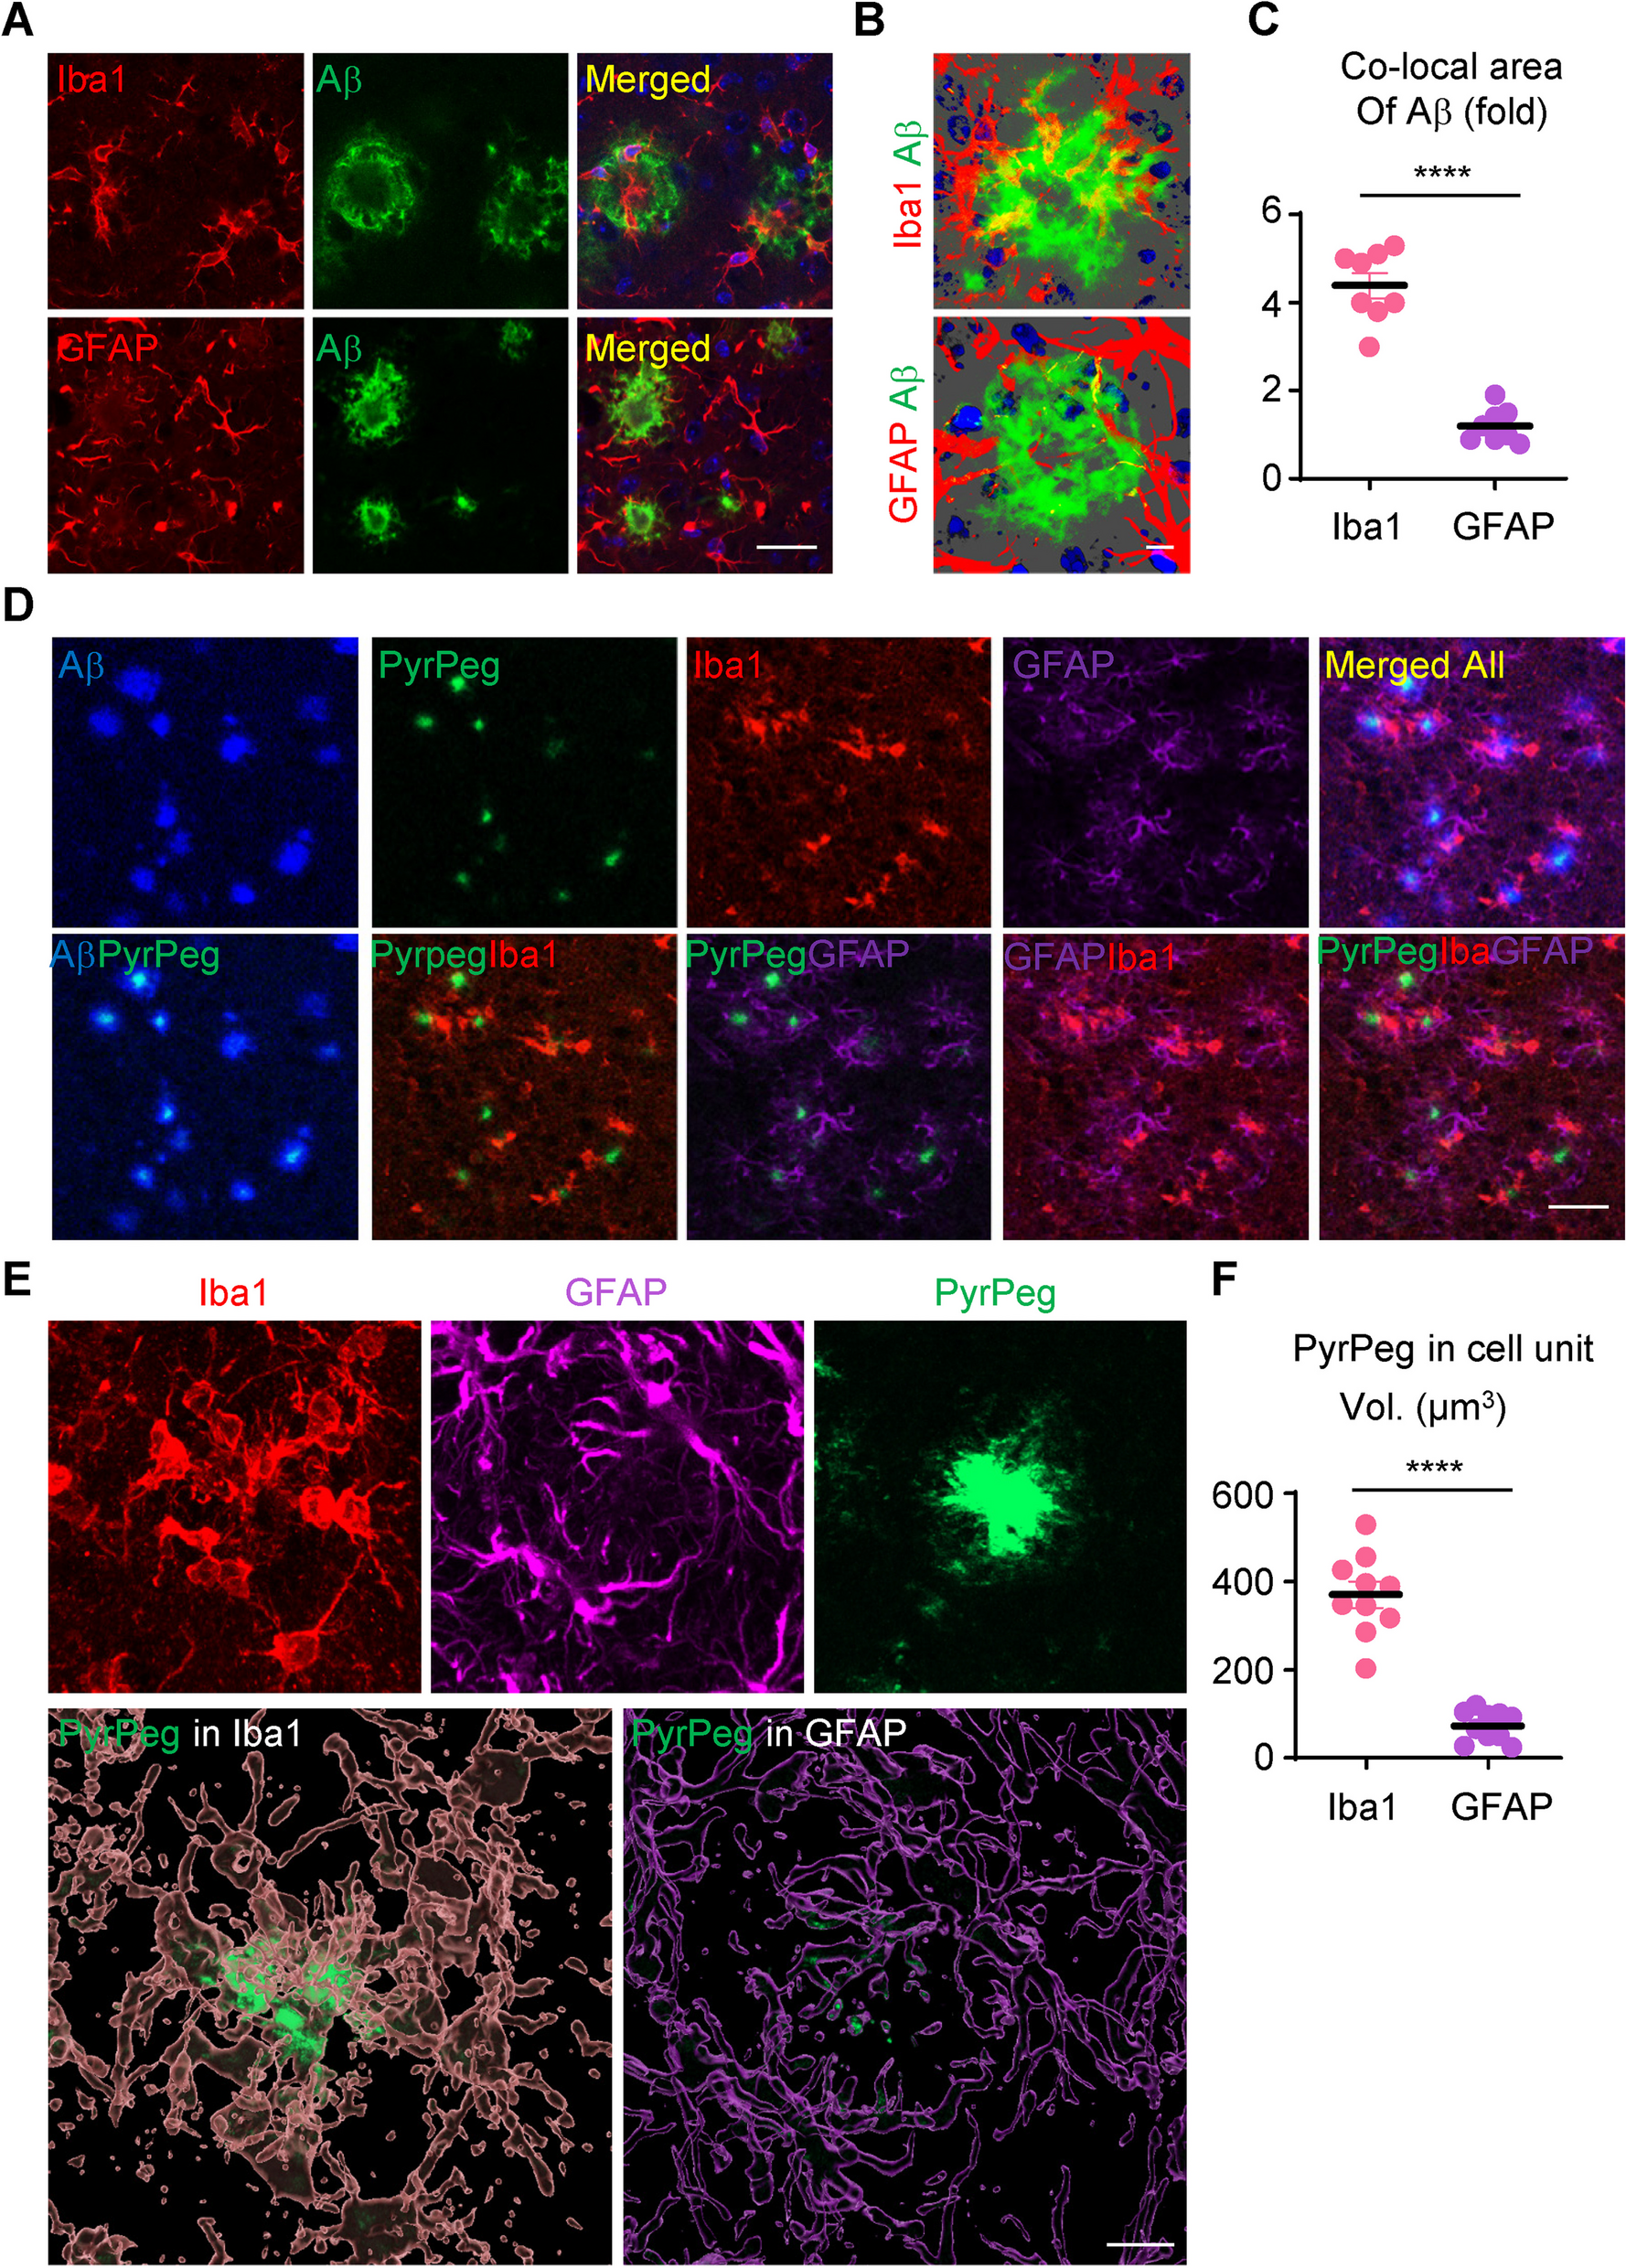 Rejuvenating aged microglia by p16ink4a-siRNA-loaded nanoparticles increases amyloid-β clearance in animal models of Alzheimer’s disease